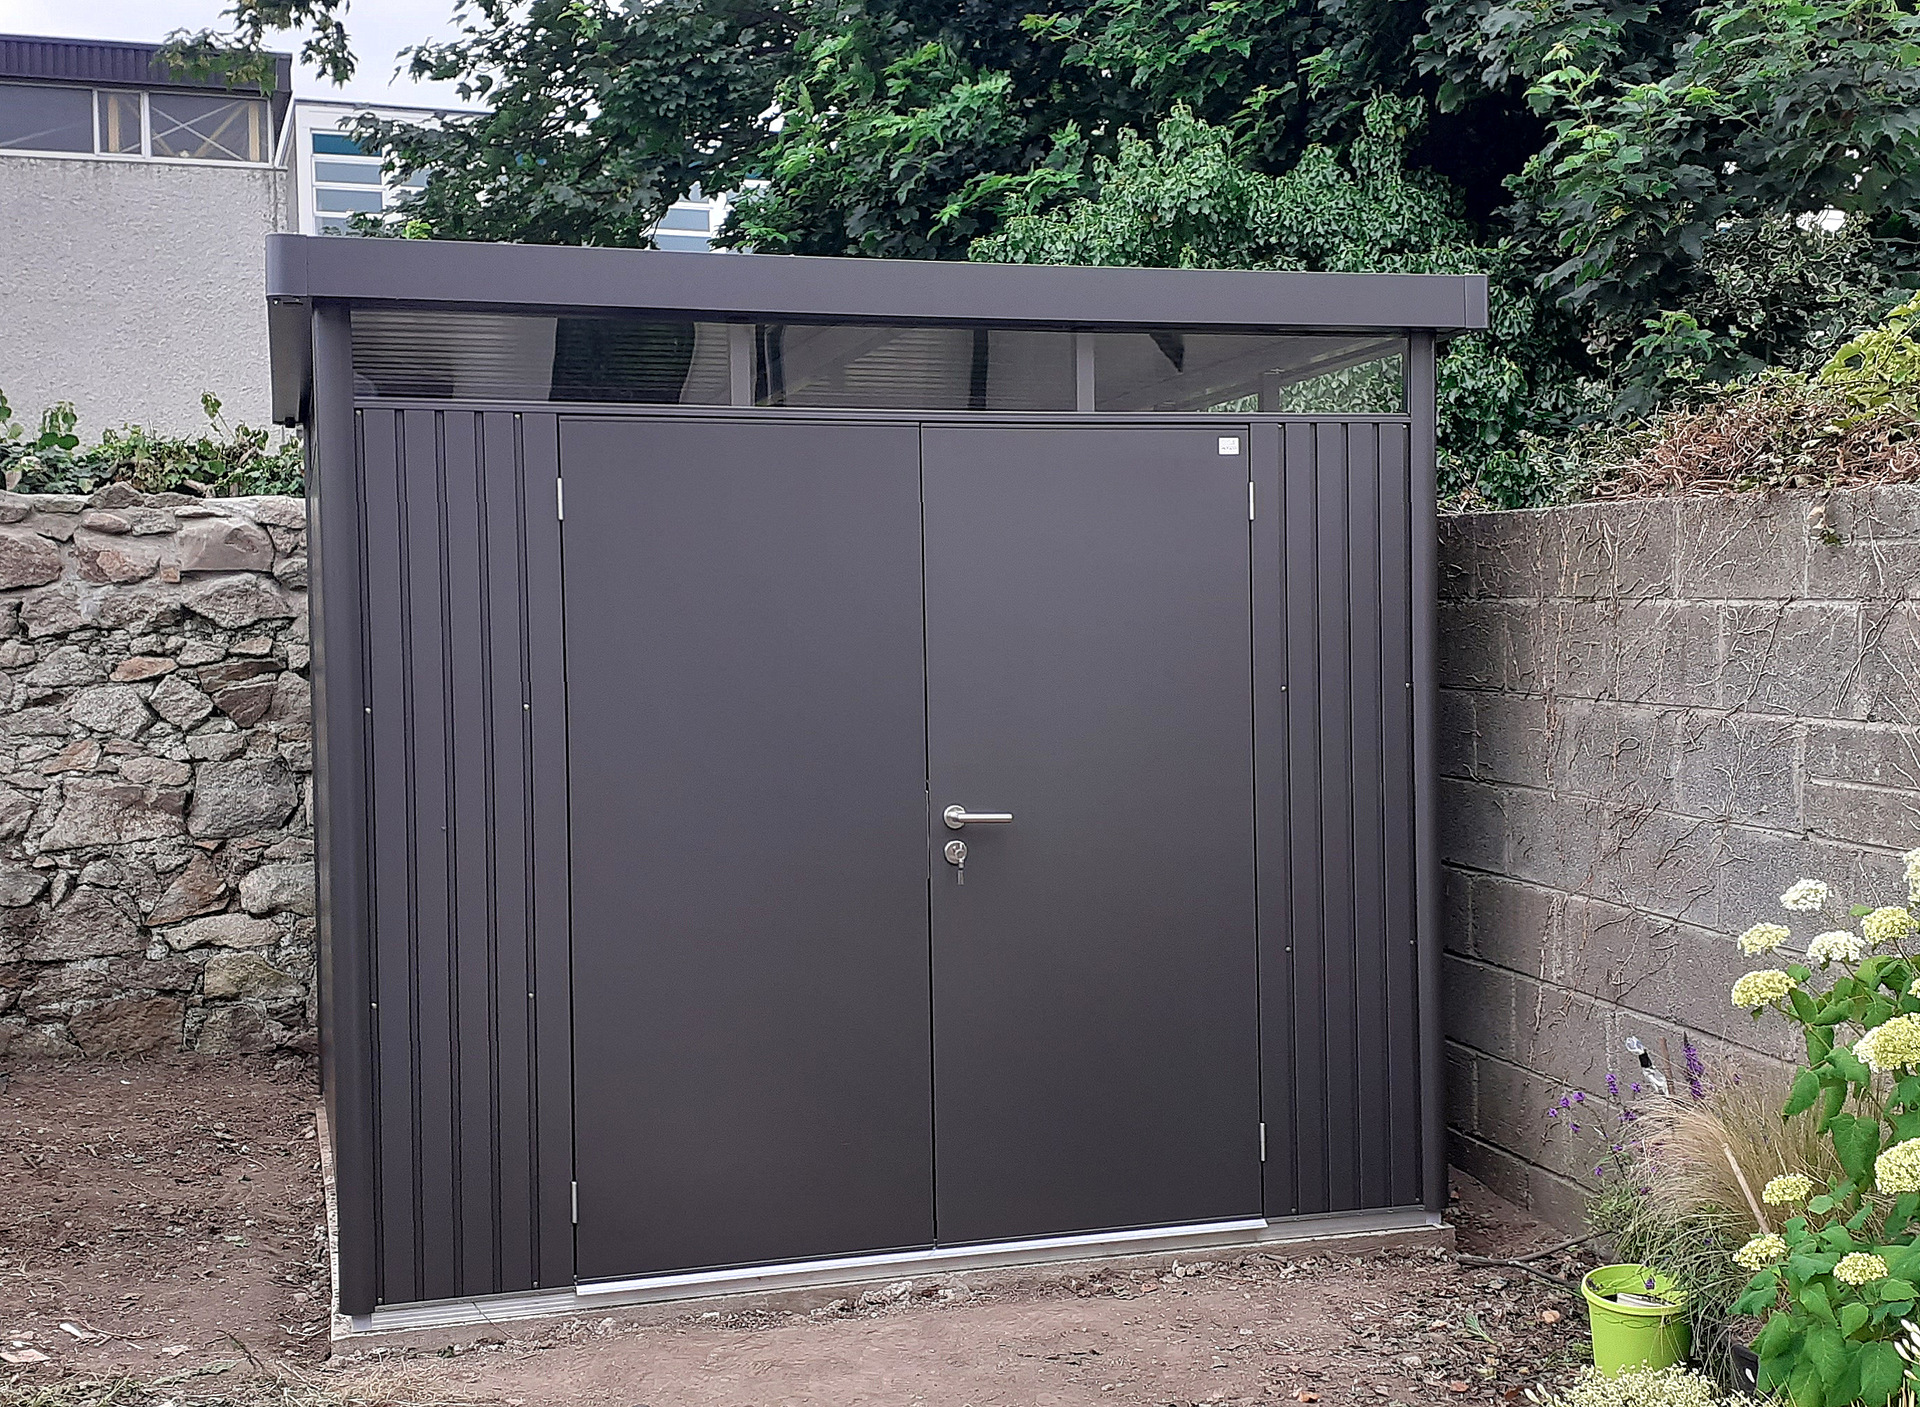 Biohort HighLine H4 Steel Garden Sheds | The stylish & secure way to store your garden items